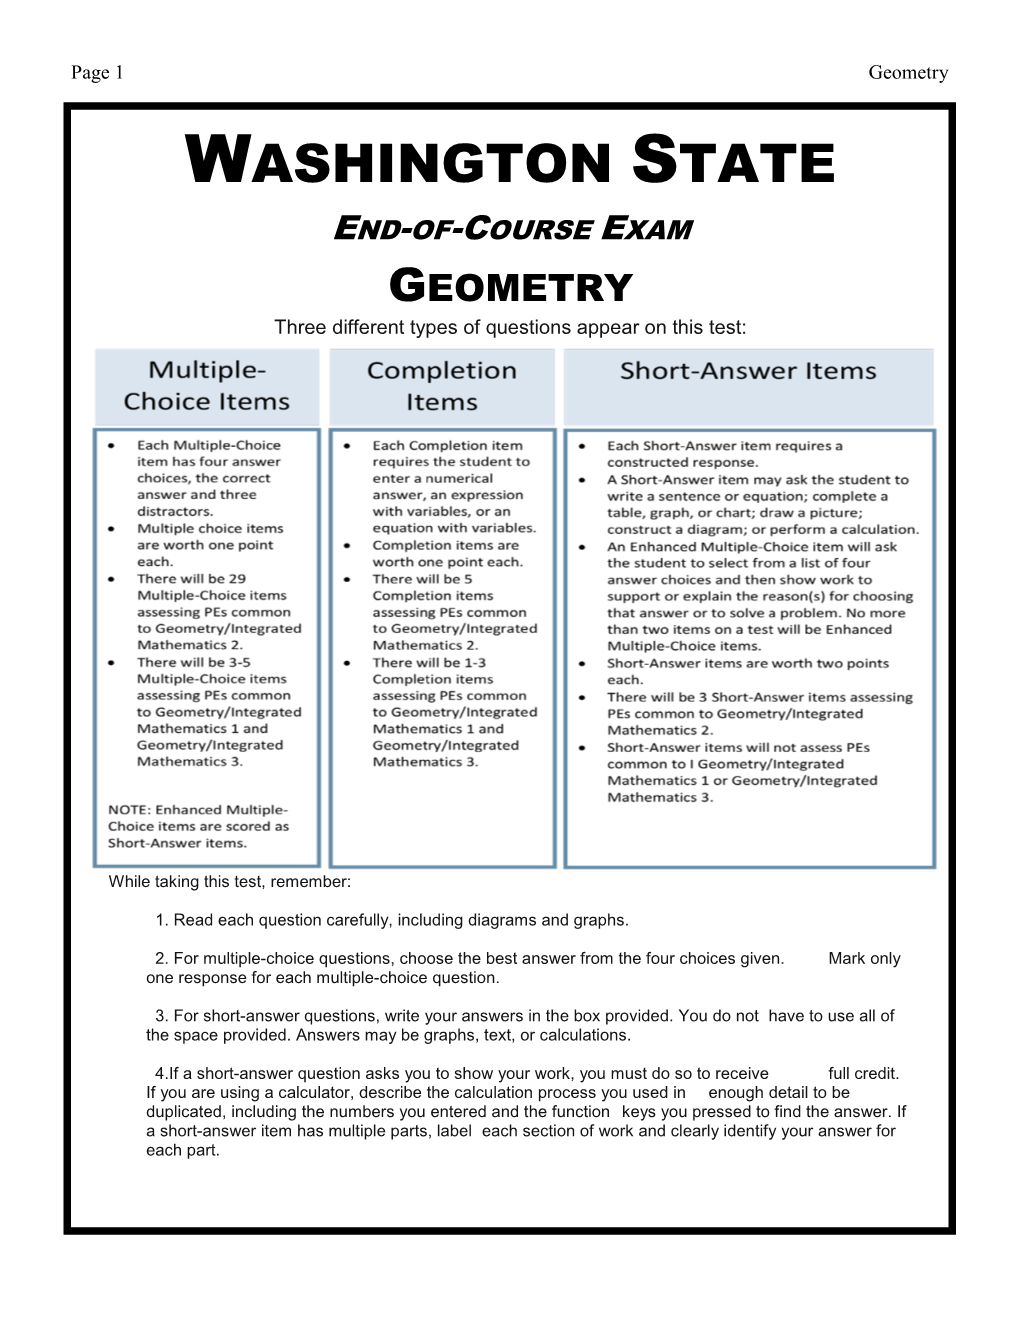 WASHINGTON STATE END-OF-COURSE EXAM GEOMETRY Three Different Types of Questions Appear on This Test